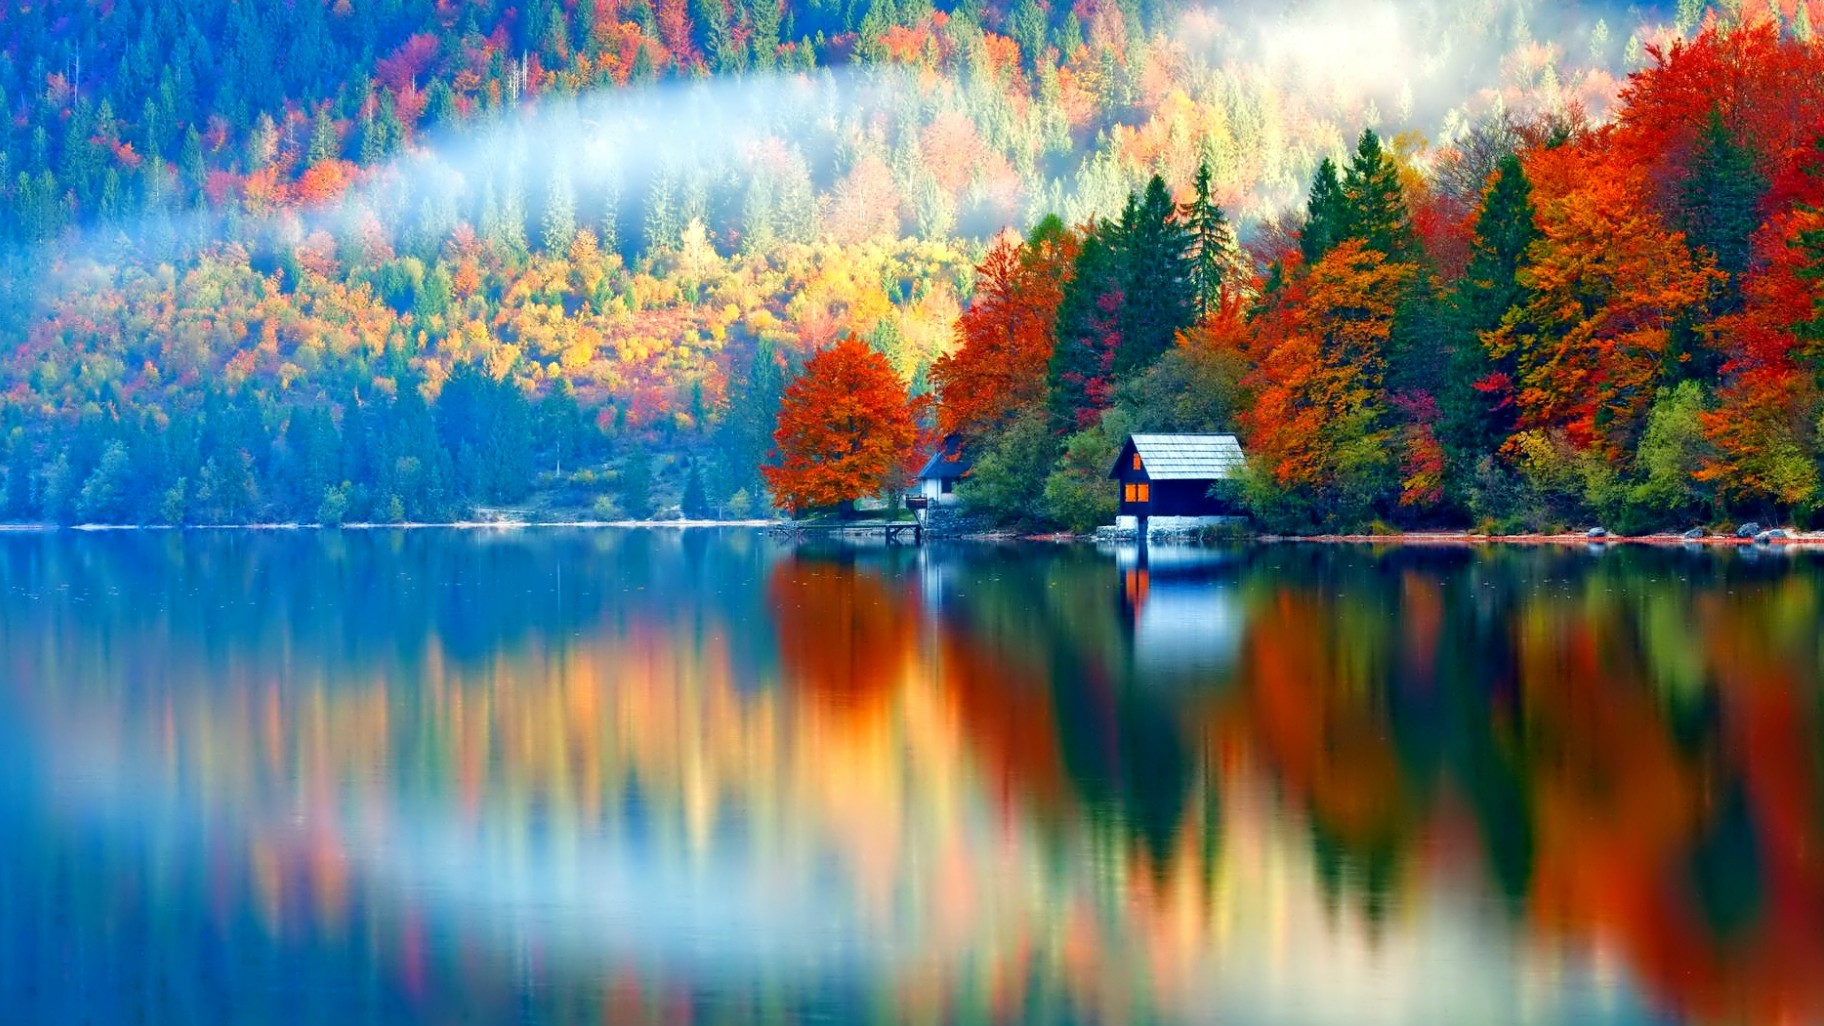 General 1824x1026 nature landscape trees forest fall colorful water lake Slovenia mist house reflection